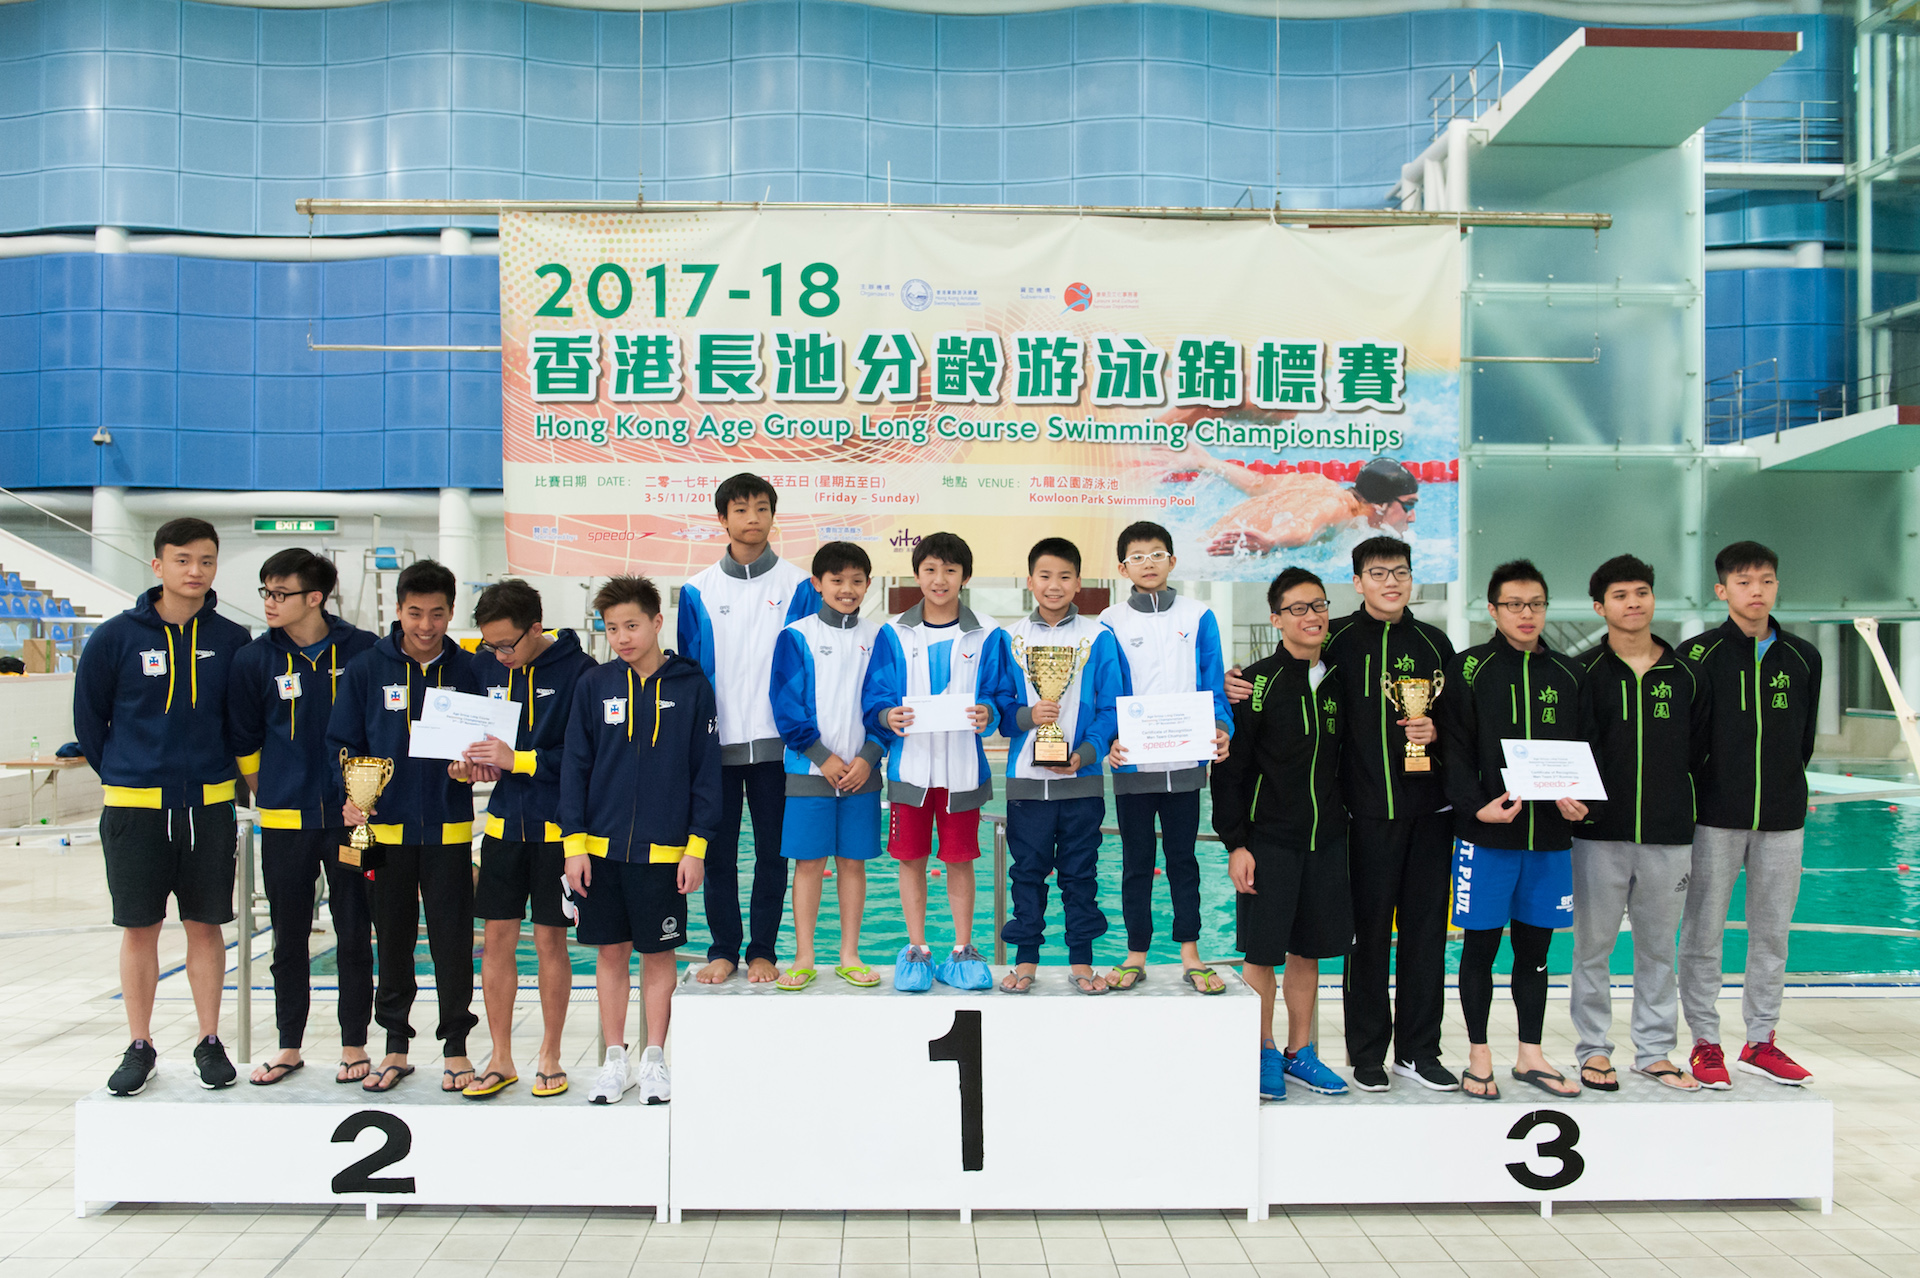 Win Tin Swimming Club - 2017 Long Course Age Group Championships 7